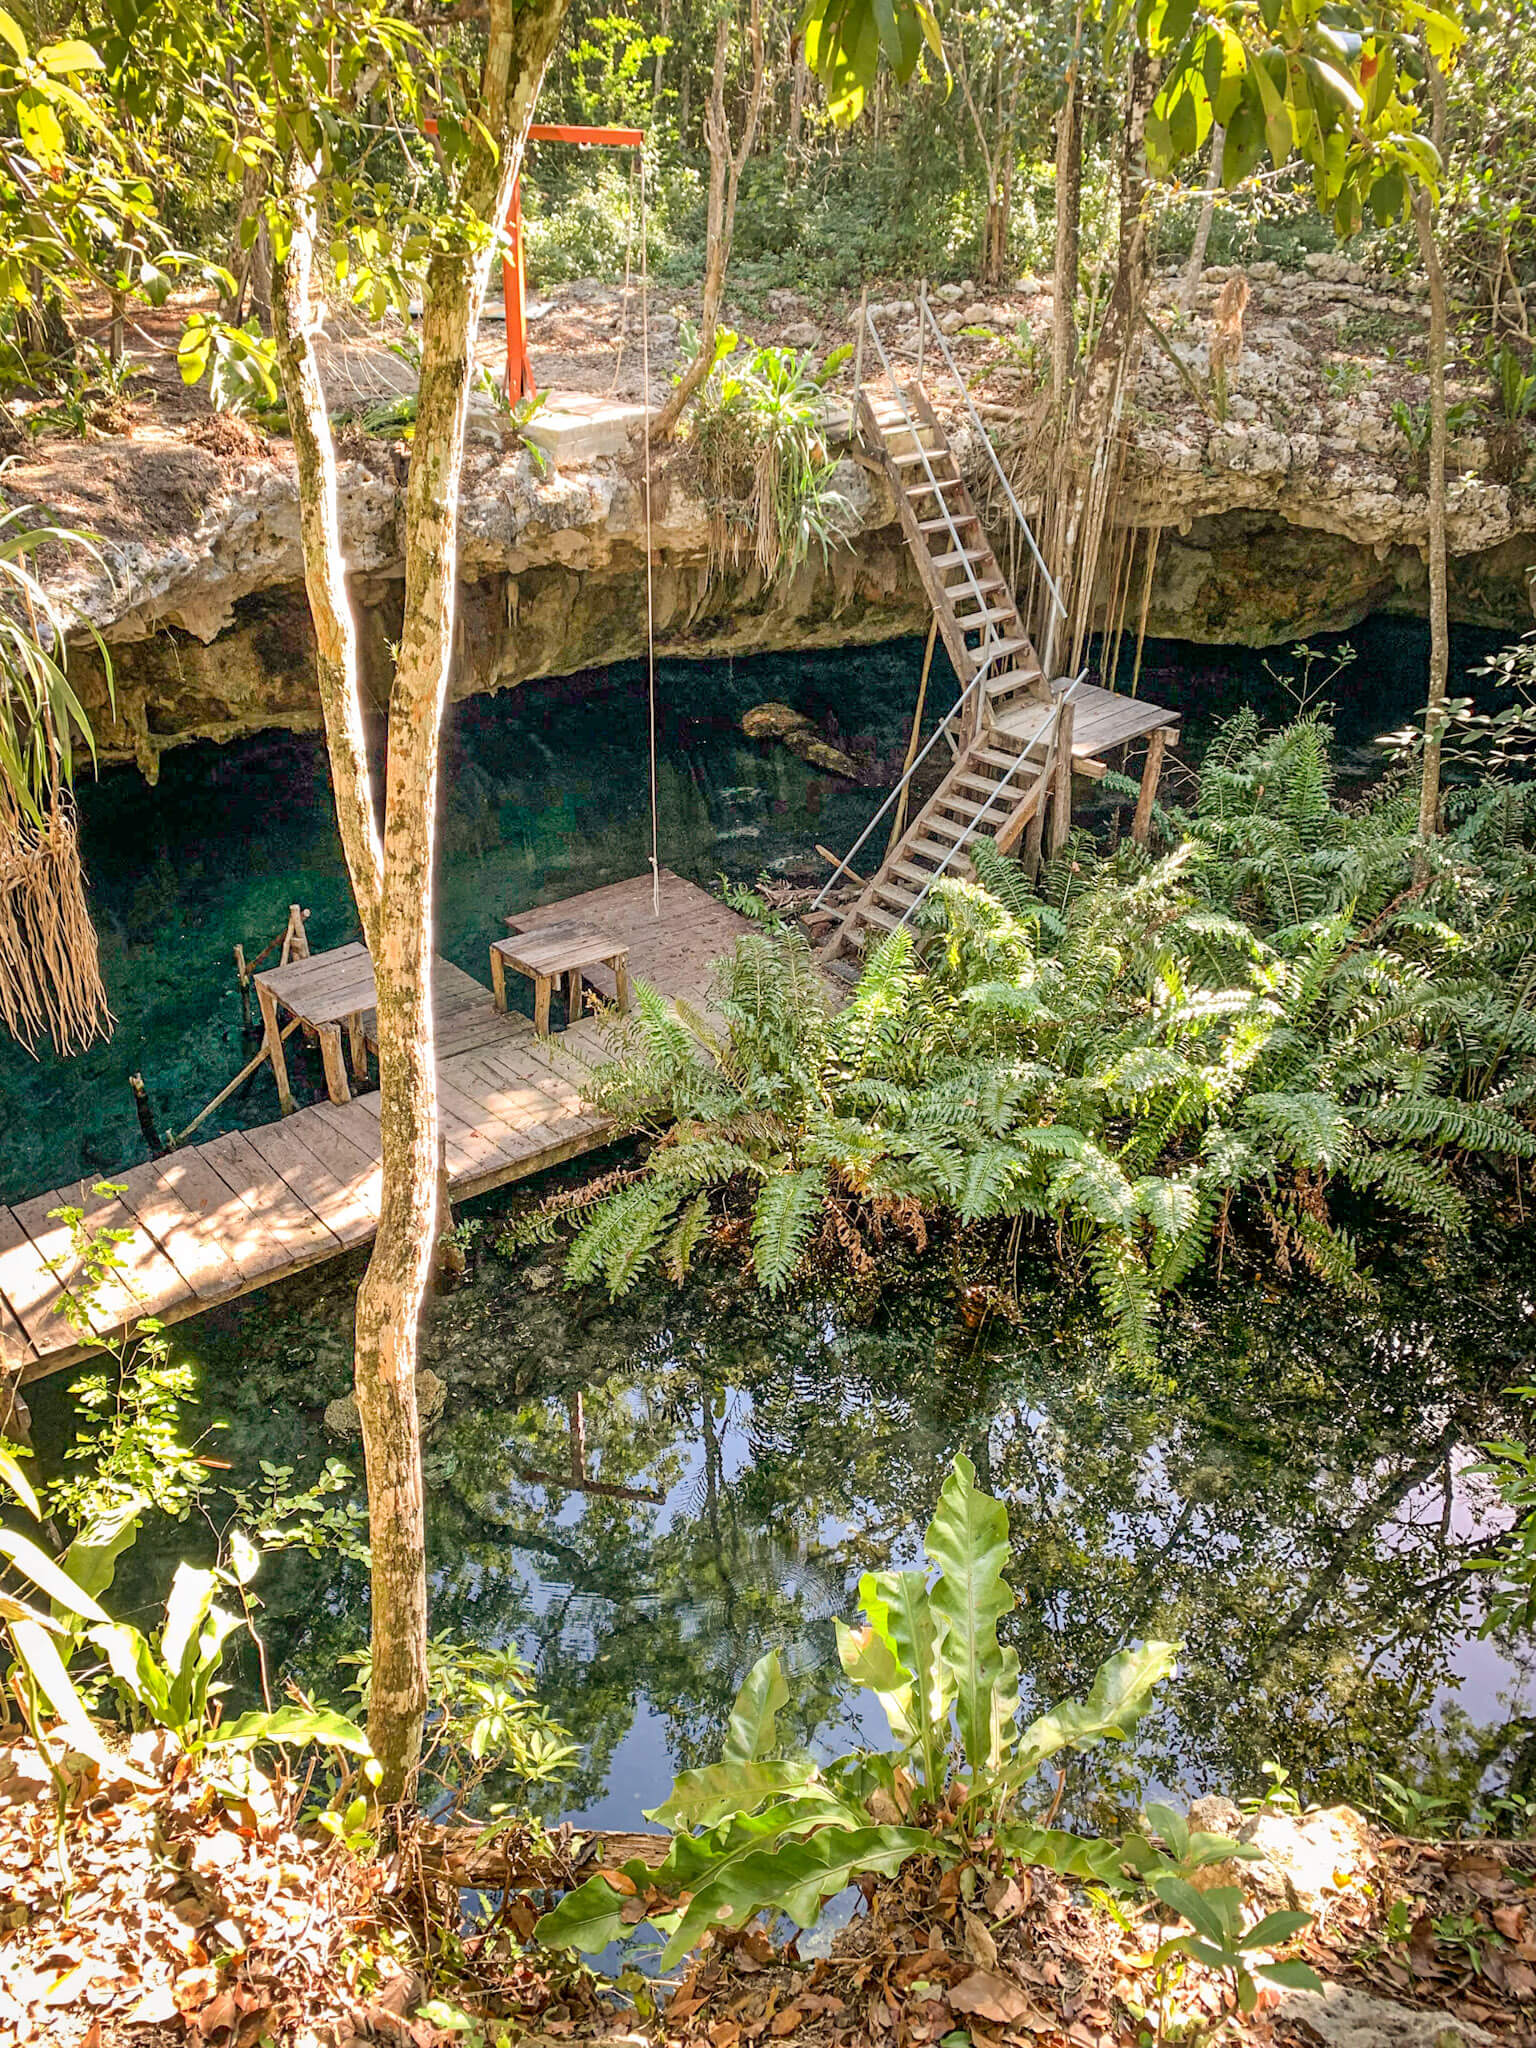 The Dreamgate Cenote near Tulum, with steps down to the water for scuba divers